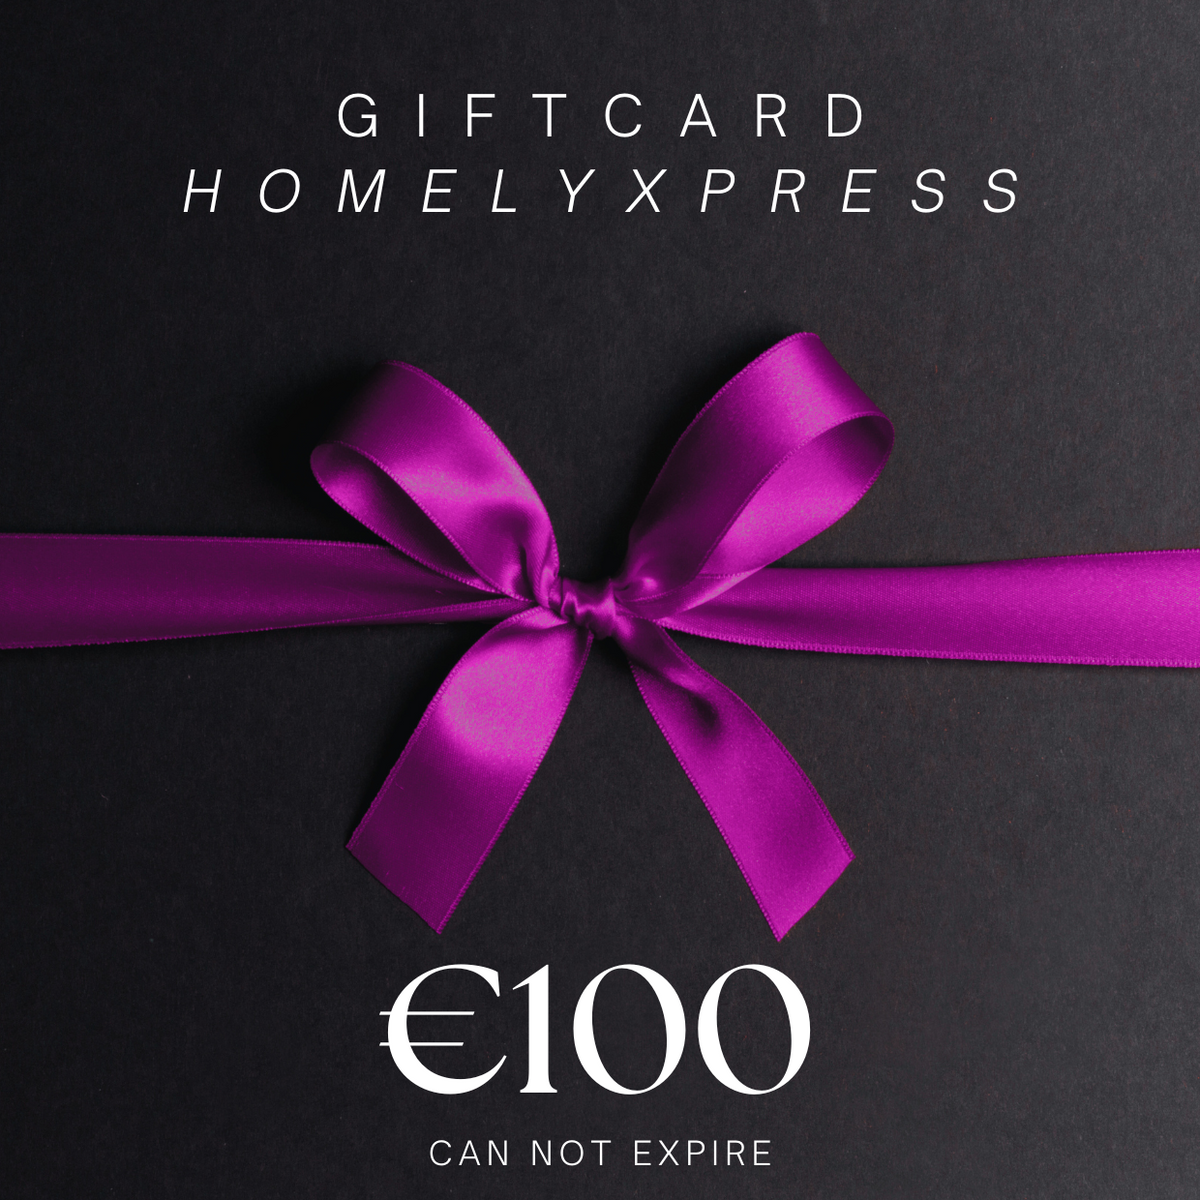 Homelyxpress - Gift card